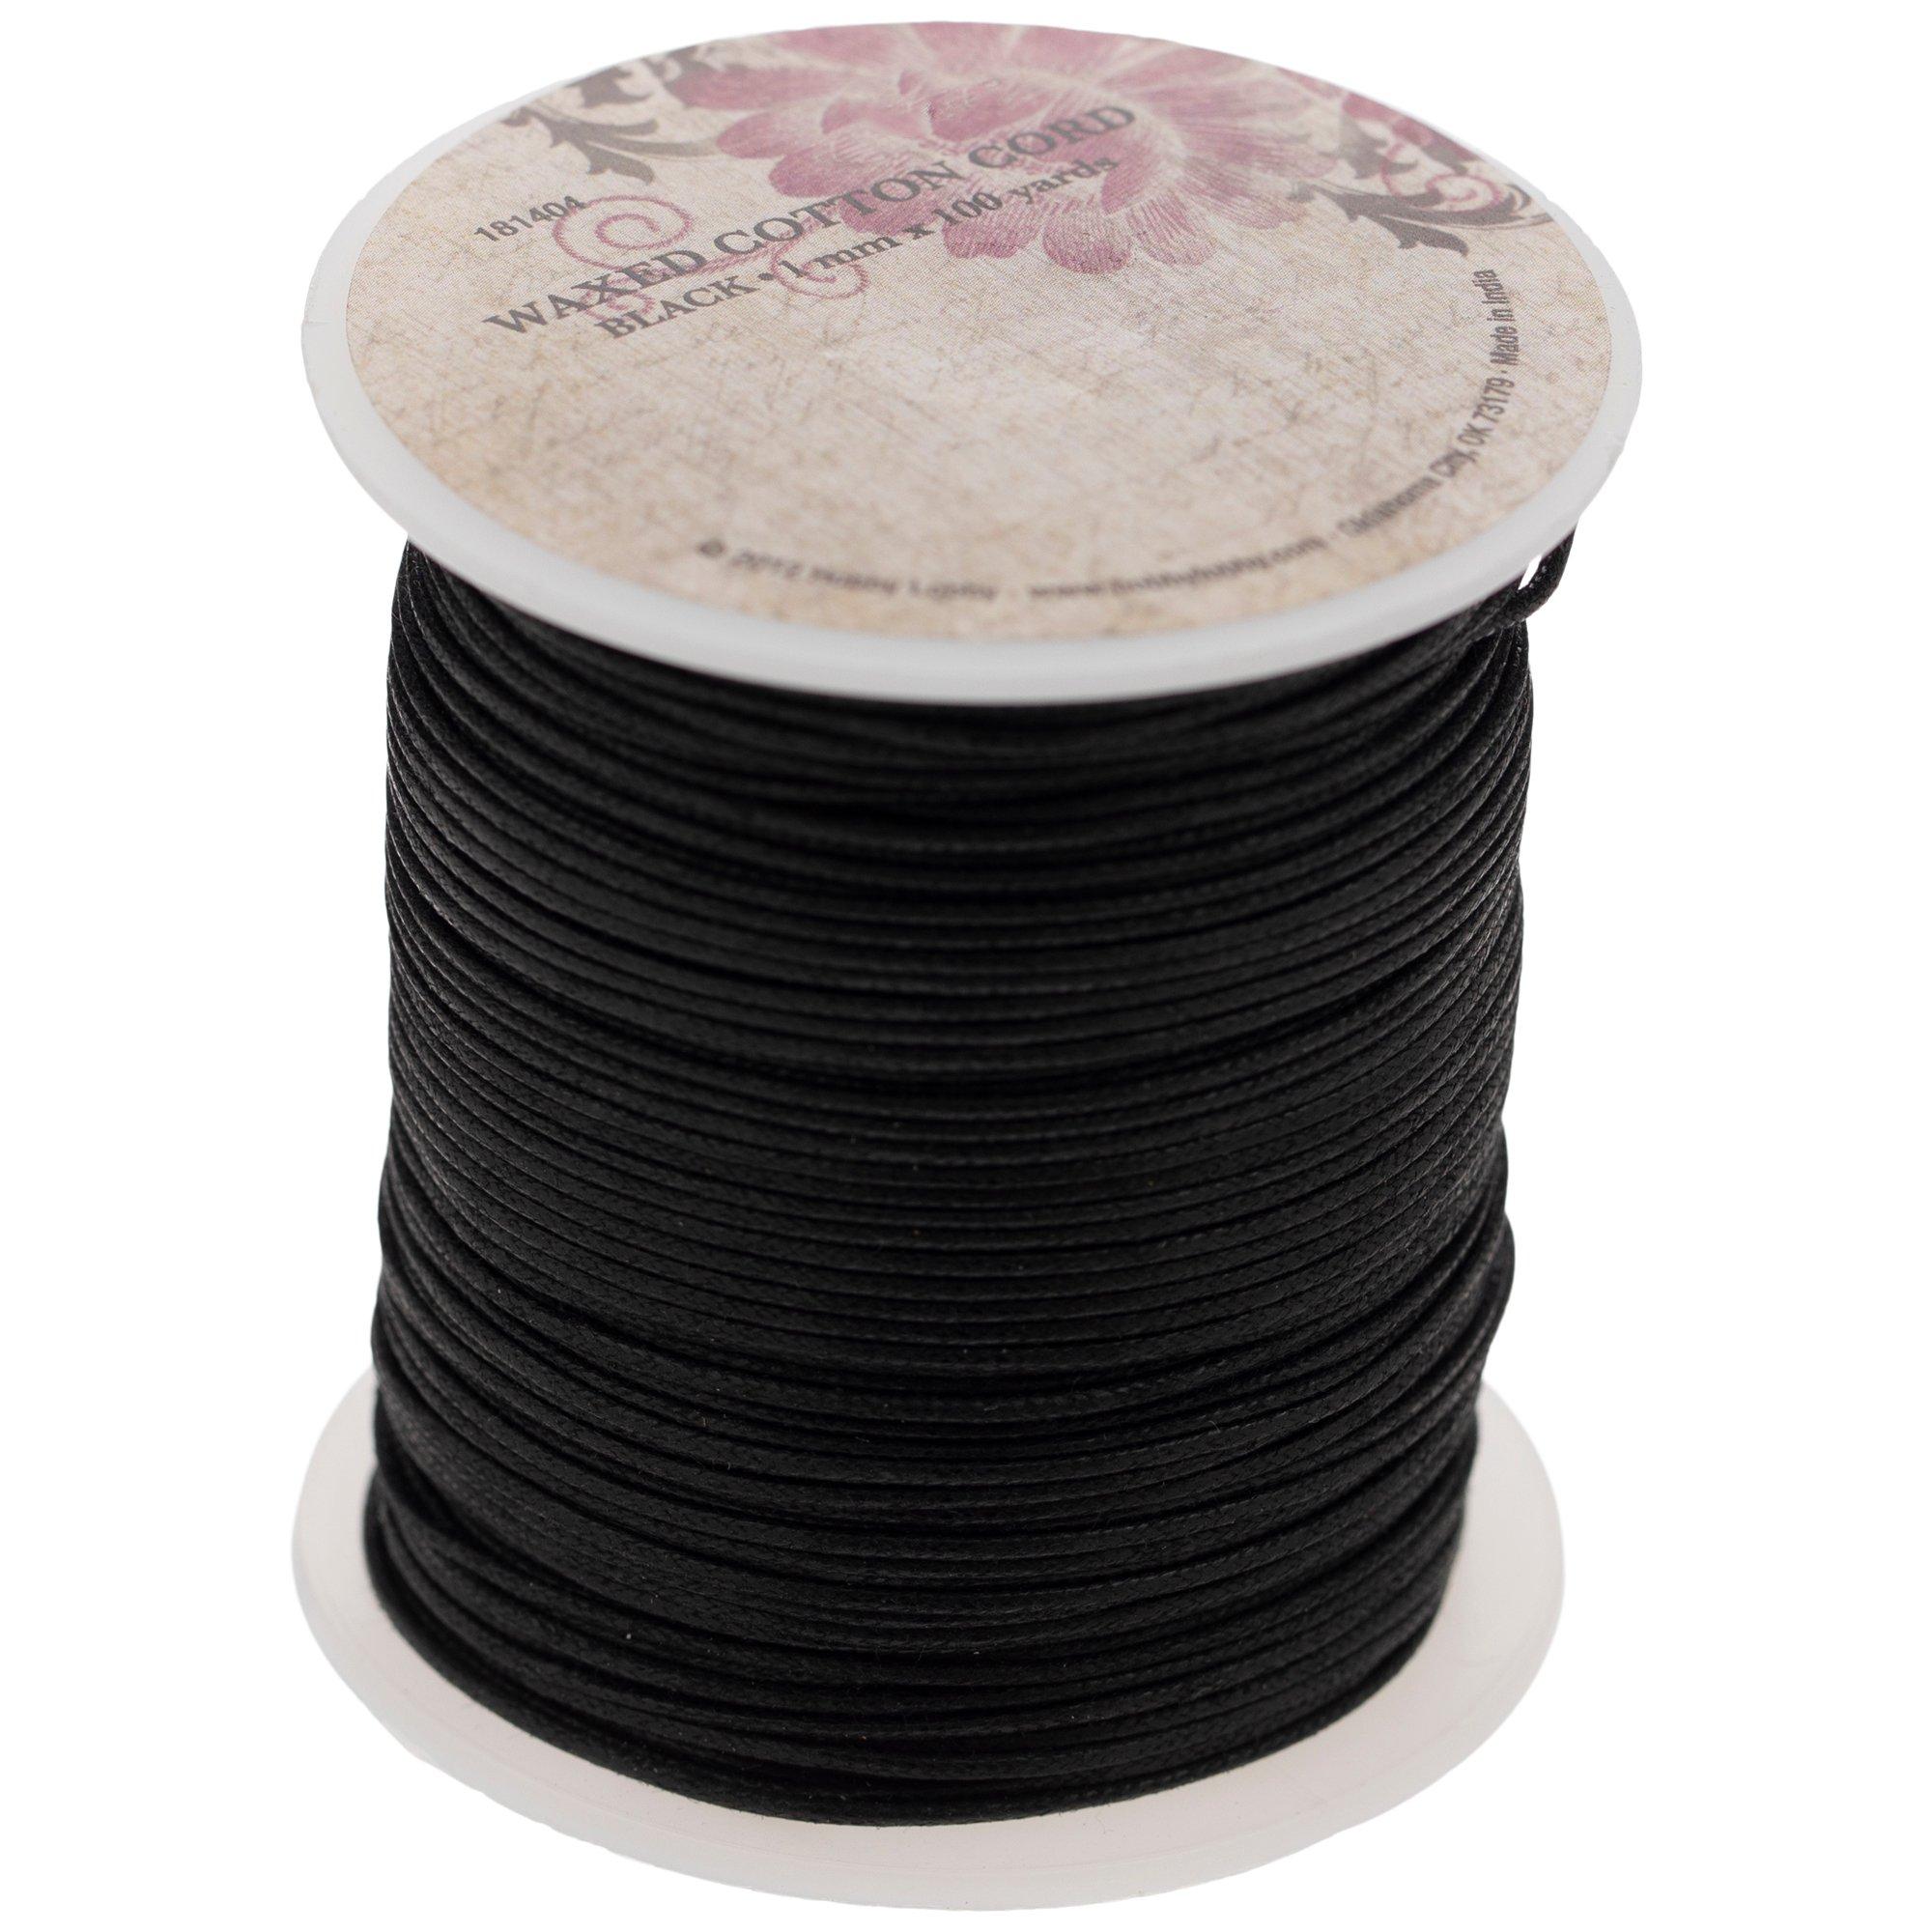 Waxed Cotton Cord Spool - 1mm